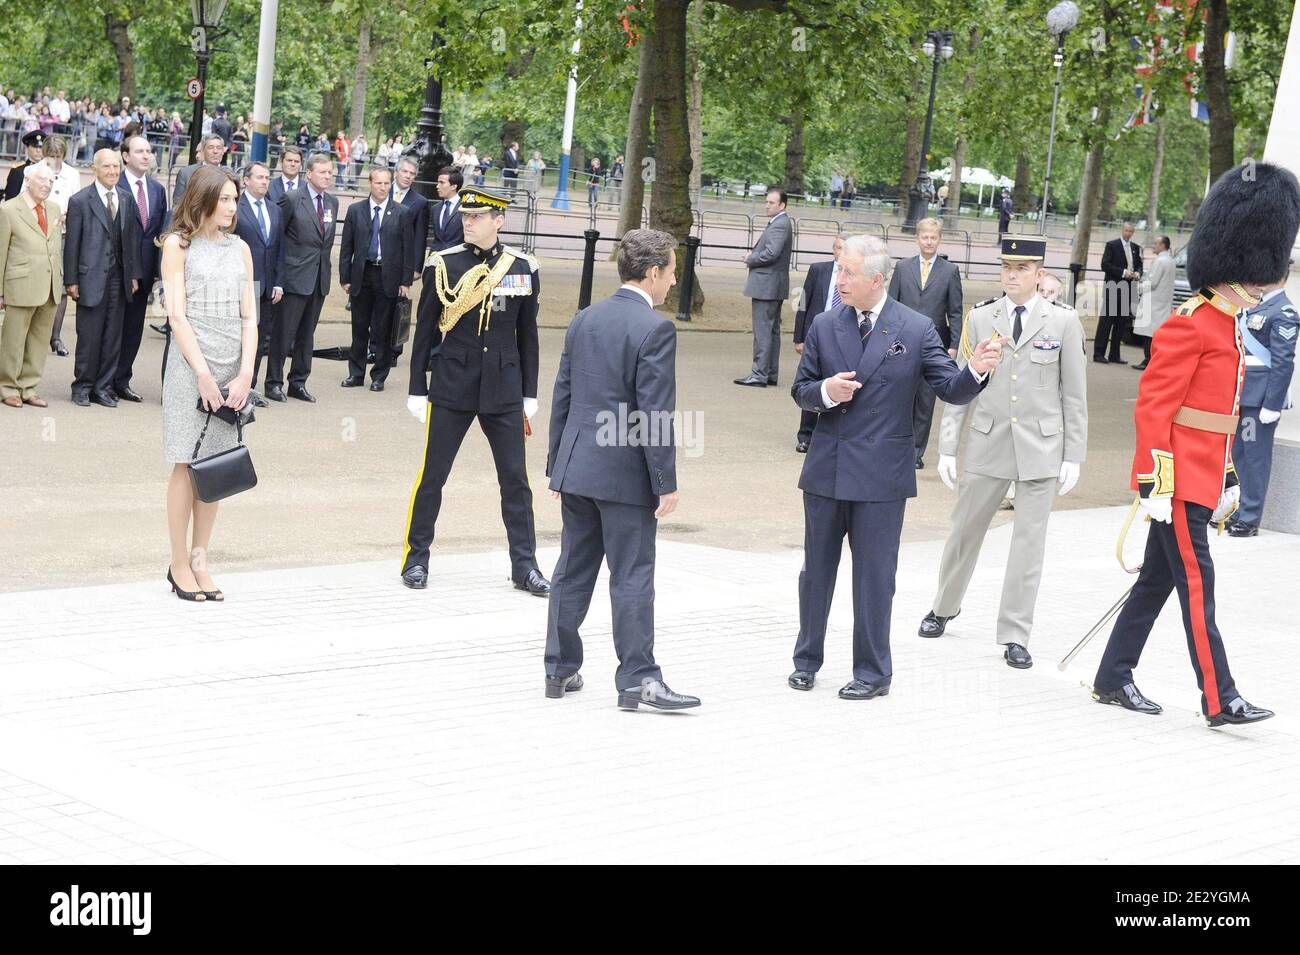 French President Nicolas Sarkozy and his wife, Carla Bruni-Sarkozy lay a wreath at the statue of Queen Elizabeth in the presence of Prince Charles, Prince of Wales in London, UK on June 18, 2010. Nicolas Sarkozy and World War II veterans visited London to mark the 70th anniversary of Charles de Gaulle's rousing radio appeal to his compatriots to resist the Nazi occupation. On June 18, 1940, four days after the fall of Paris and as the French government prepared to sign an armistice with Germany, the exiled military leader issued an impassioned appeal over the BBC airwaves to those back home. P Stock Photo